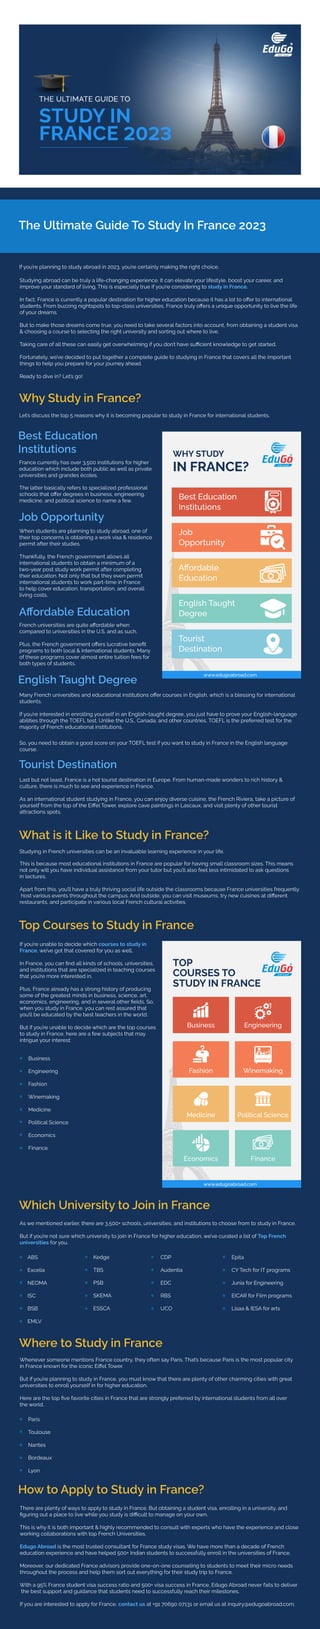 The Ultimate Guide To Study In France 2023
If you’re planning to study abroad in 2023, you’re certainly making the right choice.
Studying abroad can be truly a life-changing experience. It can elevate your lifestyle, boost your career, and
improve your standard of living. This is especially true if you’re considering to study in France.
In fact, France is currently a popular destination for higher education because it has a lot to oﬀer to international
students. From buzzing nightspots to top-class universities, France truly oﬀers a unique opportunity to live the life
of your dreams.
But to make those dreams come true, you need to take several factors into account, from obtaining a student visa
& choosing a course to selecting the right university and sorting out where to live.
Taking care of all these can easily get overwhelming if you don’t have suﬃcient knowledge to get started.
Fortunately, we’ve decided to put together a complete guide to studying in France that covers all the important
things to help you prepare for your journey ahead.
Ready to dive in? Let’s go!
Why Study in France?
Let’s discuss the top 5 reasons why it is becoming popular to study in France for international students.
Best Education
Institutions
France currently has over 3,500 institutions for higher
education which include both public as well as private
universities and grandes écoles.
The latter basically refers to specialized professional
schools that oﬀer degrees in business, engineering,
medicine, and political science to name a few.
Job Opportunity
When students are planning to study abroad, one of
their top concerns is obtaining a work visa & residence
permit after their studies.
Thankfully, the French government allows all
international students to obtain a minimum of a
two-year post study work permit after completing
their education. Not only that but they even permit
international students to work part-time in France
to help cover education, transportation, and overall
living costs.
Aﬀordable Education
French universities are quite aﬀordable when
compared to universities in the U.S. and as such.
Plus, the French government oﬀers lucrative beneﬁt
programs to both local & international students. Many
of these programs cover almost entire tuition fees for
both types of students.
English Taught Degree
Many French universities and educational institutions oﬀer courses in English, which is a blessing for international
students.
If you’re interested in enrolling yourself in an English-taught degree, you just have to prove your English-language
abilities through the TOEFL test. Unlike the U.S., Canada, and other countries, TOEFL is the preferred test for the
majority of French educational institutions.
So, you need to obtain a good score on your TOEFL test if you want to study in France in the English language
course.
Tourist Destination
Last but not least, France is a hot tourist destination in Europe. From human-made wonders to rich history &
culture, there is much to see and experience in France.
As an international student studying in France, you can enjoy diverse cuisine, the French Riviera, take a picture of
yourself from the top of the Eiﬀel Tower, explore cave paintings in Lascaux, and visit plenty of other tourist
attractions spots.
What is it Like to Study in France?
Studying in French universities can be an invaluable learning experience in your life.
This is because most educational institutions in France are popular for having small classroom sizes. This means
not only will you have individual assistance from your tutor but you’ll also feel less intimidated to ask questions
in lectures.
Apart from this, you’ll have a truly thriving social life outside the classrooms because France universities frequently
host various events throughout the campus. And outside, you can visit museums, try new cuisines at diﬀerent
restaurants, and participate in various local French cultural activities.
Top Courses to Study in France
If you’re unable to decide which courses to study in
France, we’ve got that covered for you as well.
In France, you can ﬁnd all kinds of schools, universities,
and institutions that are specialized in teaching courses
that you’re more interested in.
Plus, France already has a strong history of producing
some of the greatest minds in business, science, art,
economics, engineering, and in several other ﬁelds. So,
when you study in France, you can rest assured that
you’ll be educated by the best teachers in the world.
But if you’re unable to decide which are the top courses
to study in France, here are a few subjects that may
intrigue your interest:
Business
Engineering
Fashion
Winemaking
Medicine
Political Science
Economics
Finance
Which University to Join in France
As we mentioned earlier, there are 3,500+ schools, universities, and institutions to choose from to study in France.
But if you’re not sure which university to join in France for higher education, we’ve curated a list of Top French
universities for you.
ABS
Excelia
NEOMA
ISC
BSB
EMLV
Kedge
TBS
PSB
SKEMA
ESSCA
CDP
Audentia
EDC
RBS
UCO
Epita
CY Tech for IT programs
Junia for Engineering
EICAR for Film programs
Lisaa & IESA for arts
Where to Study in France
Whenever someone mentions France country, they often say Paris. That’s because Paris is the most popular city
in France known for the iconic Eiﬀel Tower.
But if you’re planning to study in France, you must know that there are plenty of other charming cities with great
universities to enroll yourself in for higher education.
Here are the top ﬁve favorite cities in France that are strongly preferred by international students from all over
the world.
Paris
Toulouse
Nantes
Bordeaux
Lyon
How to Apply to Study in France?
There are plenty of ways to apply to study in France. But obtaining a student visa, enrolling in a university, and
ﬁguring out a place to live while you study is diﬃcult to manage on your own.
This is why it is both important & highly recommended to consult with experts who have the experience and close
working collaborations with top French Universities.
Edugo Abroad is the most trusted consultant for France study visas. We have more than a decade of French
education experience and have helped 500+ Indian students to successfully enroll in the universities of France.
Moreover, our dedicated France advisors provide one-on-one counseling to students to meet their micro needs
throughout the process and help them sort out everything for their study trip to France.
With a 95% France student visa success ratio and 500+ visa success in France, Edugo Abroad never fails to deliver
the best support and guidance that students need to successfully reach their milestones.
If you are interested to apply for France, contact us at +91 70690 07131 or email us at inquiry@edugoabroad.com.
www.edugoabroad.com
www.edugoabroad.com/contact
 